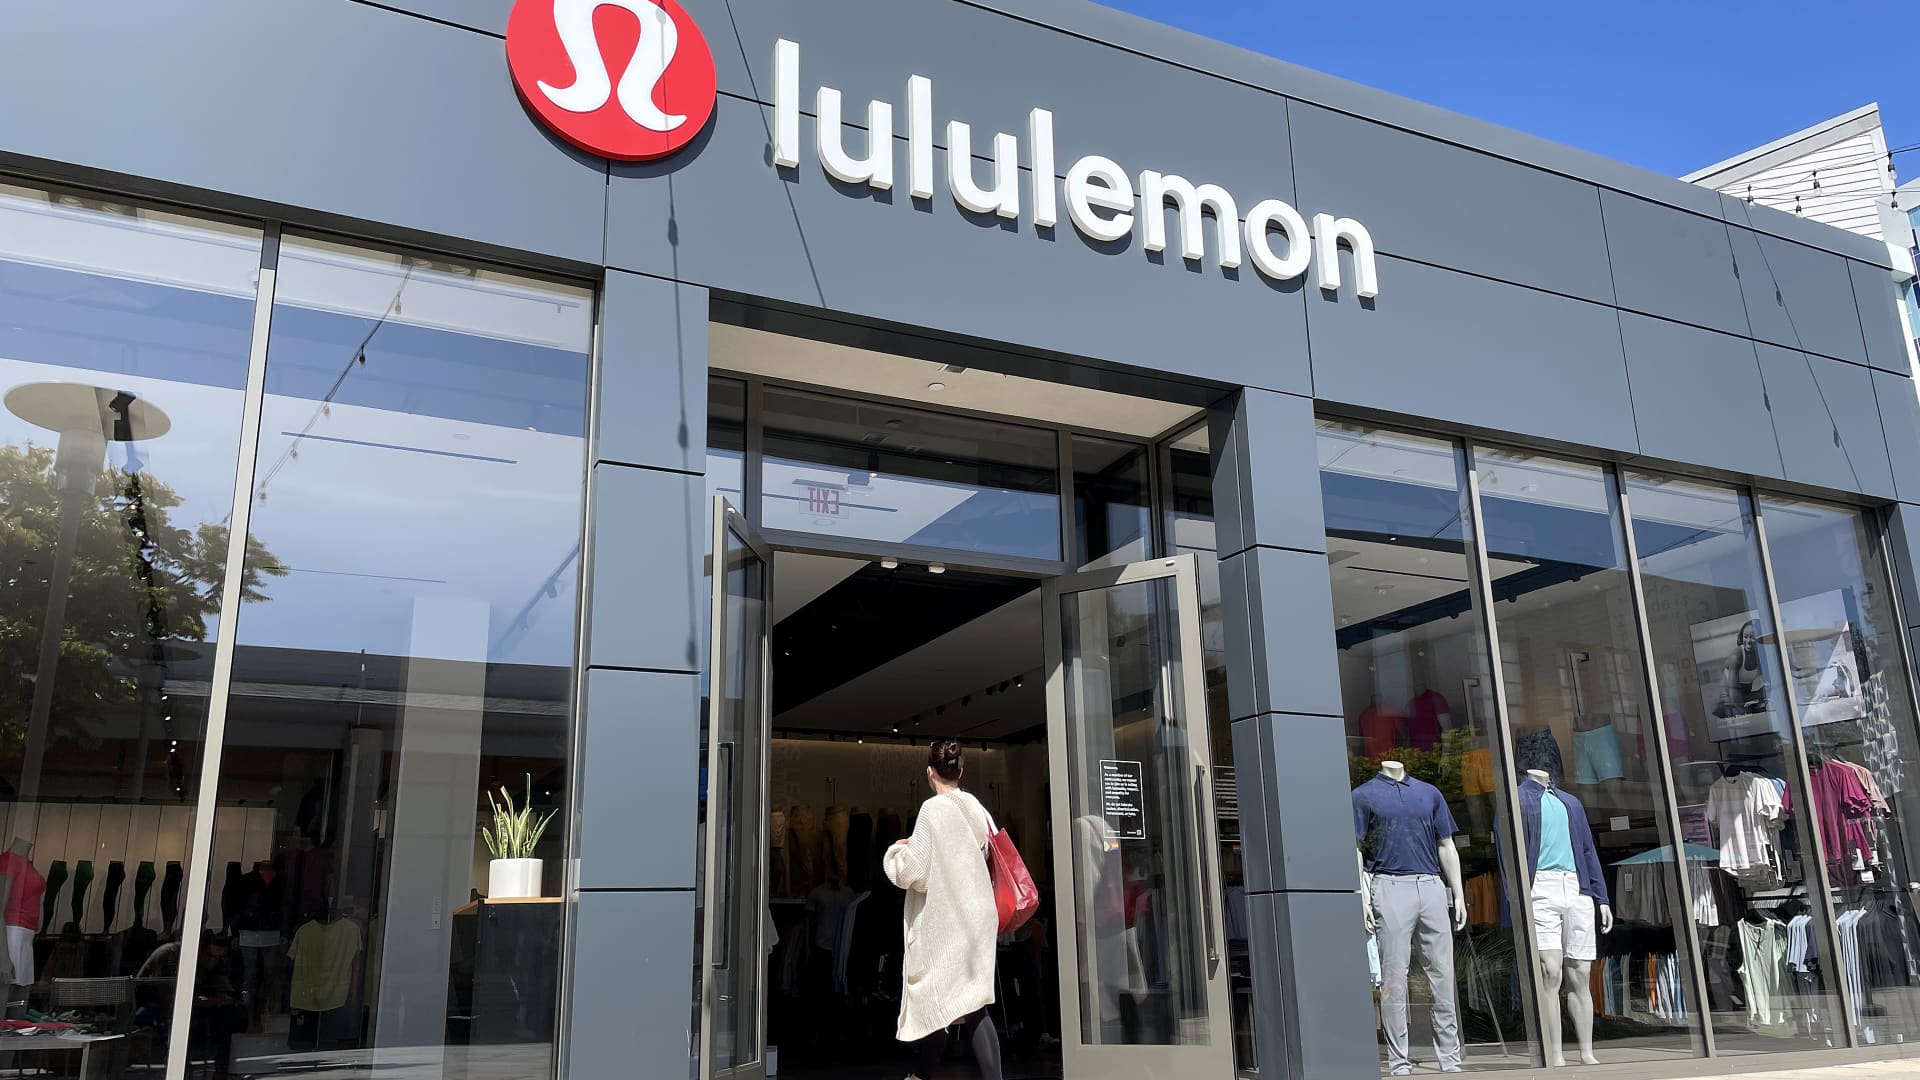 Lululemon sees sales and profit jump 18%, boosts full-year guidance - CNBC